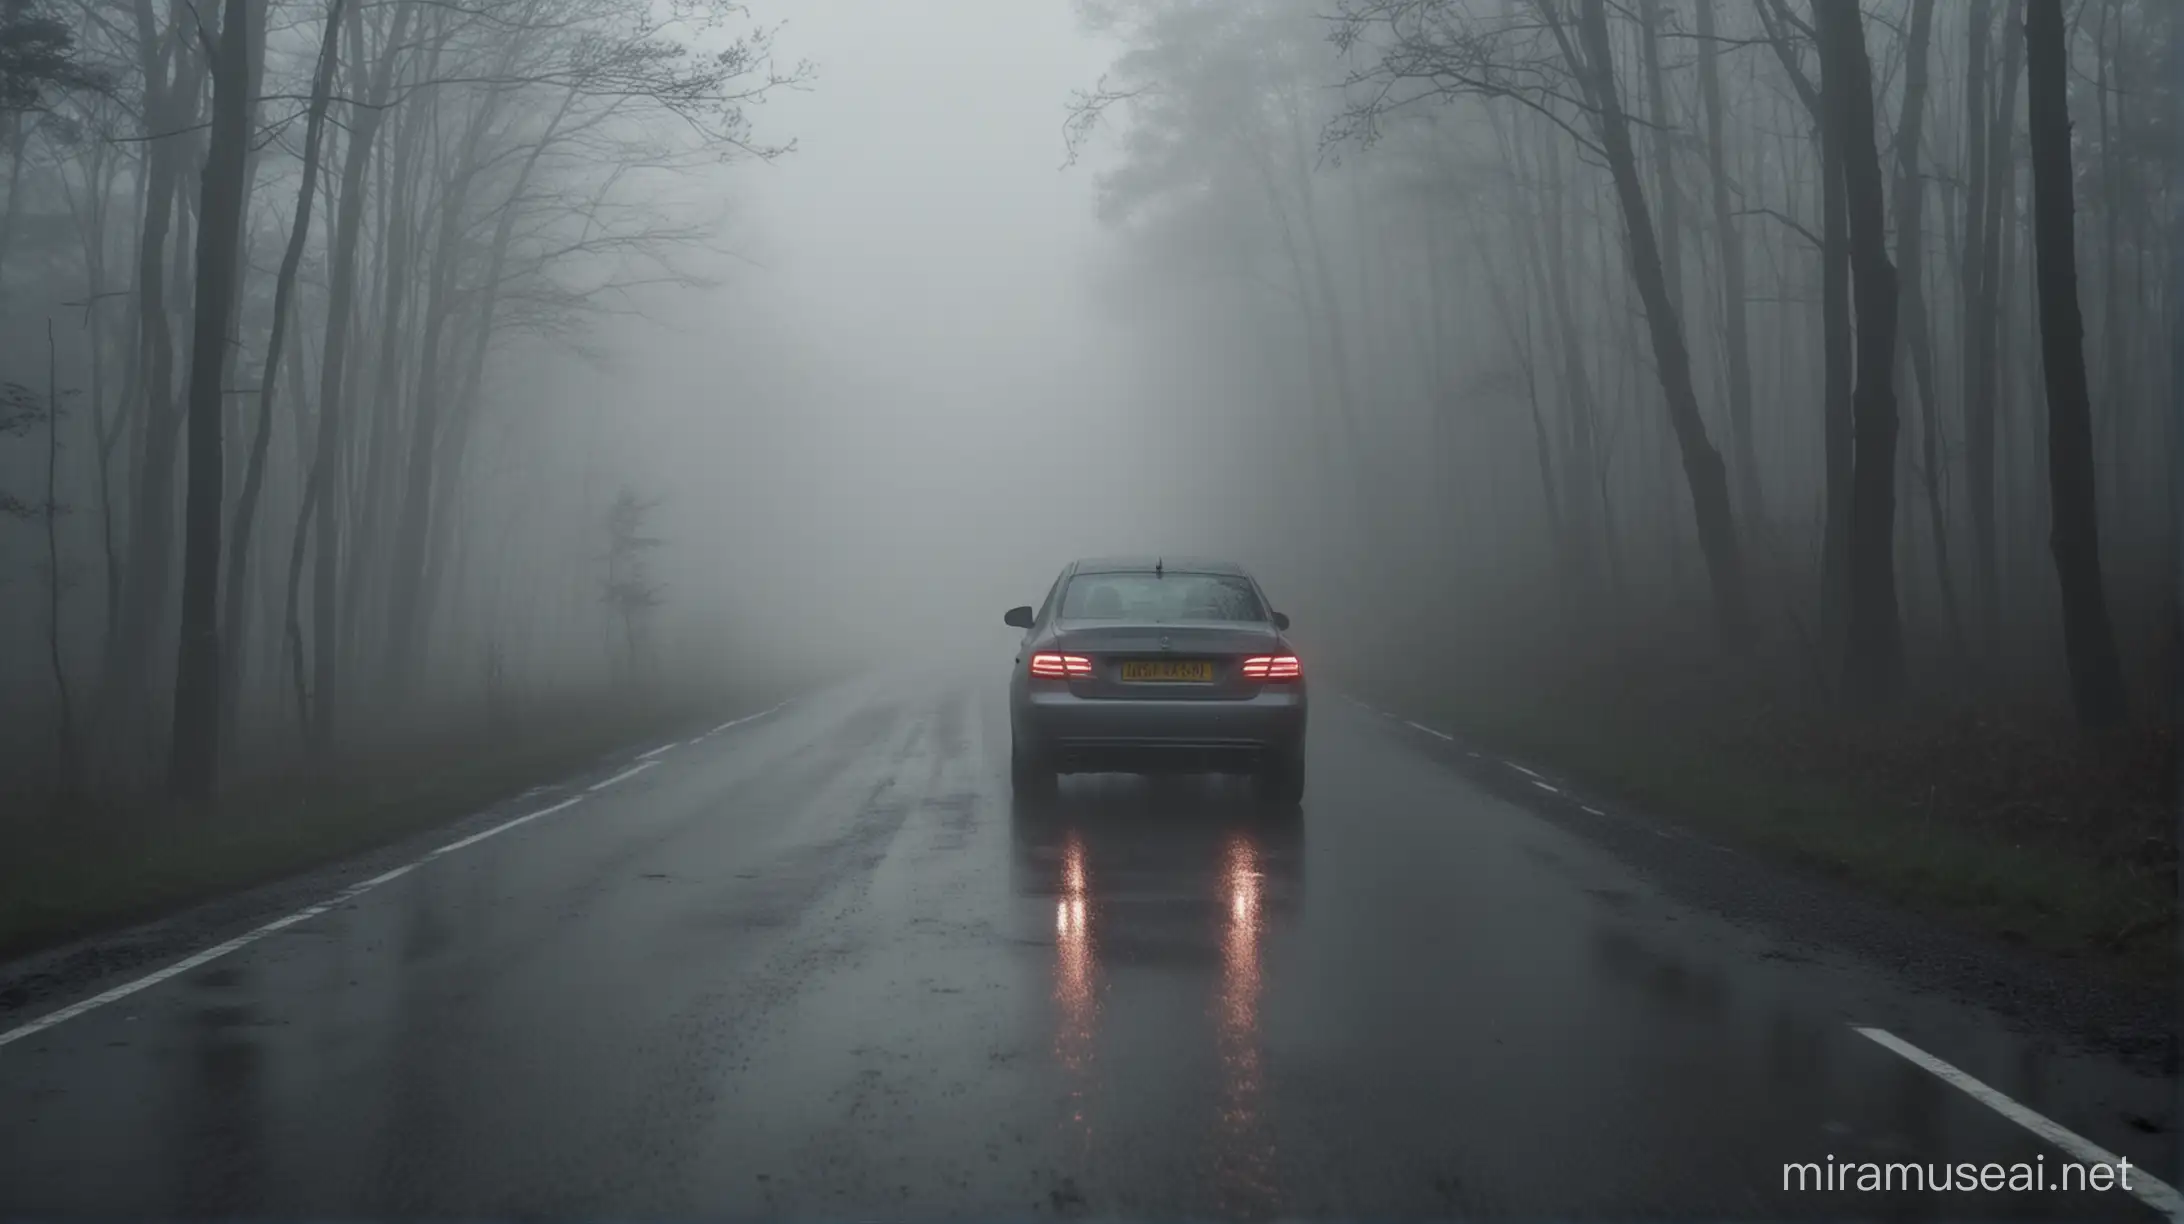 camera pulls back as the car goes through a dark misty road and another car follows